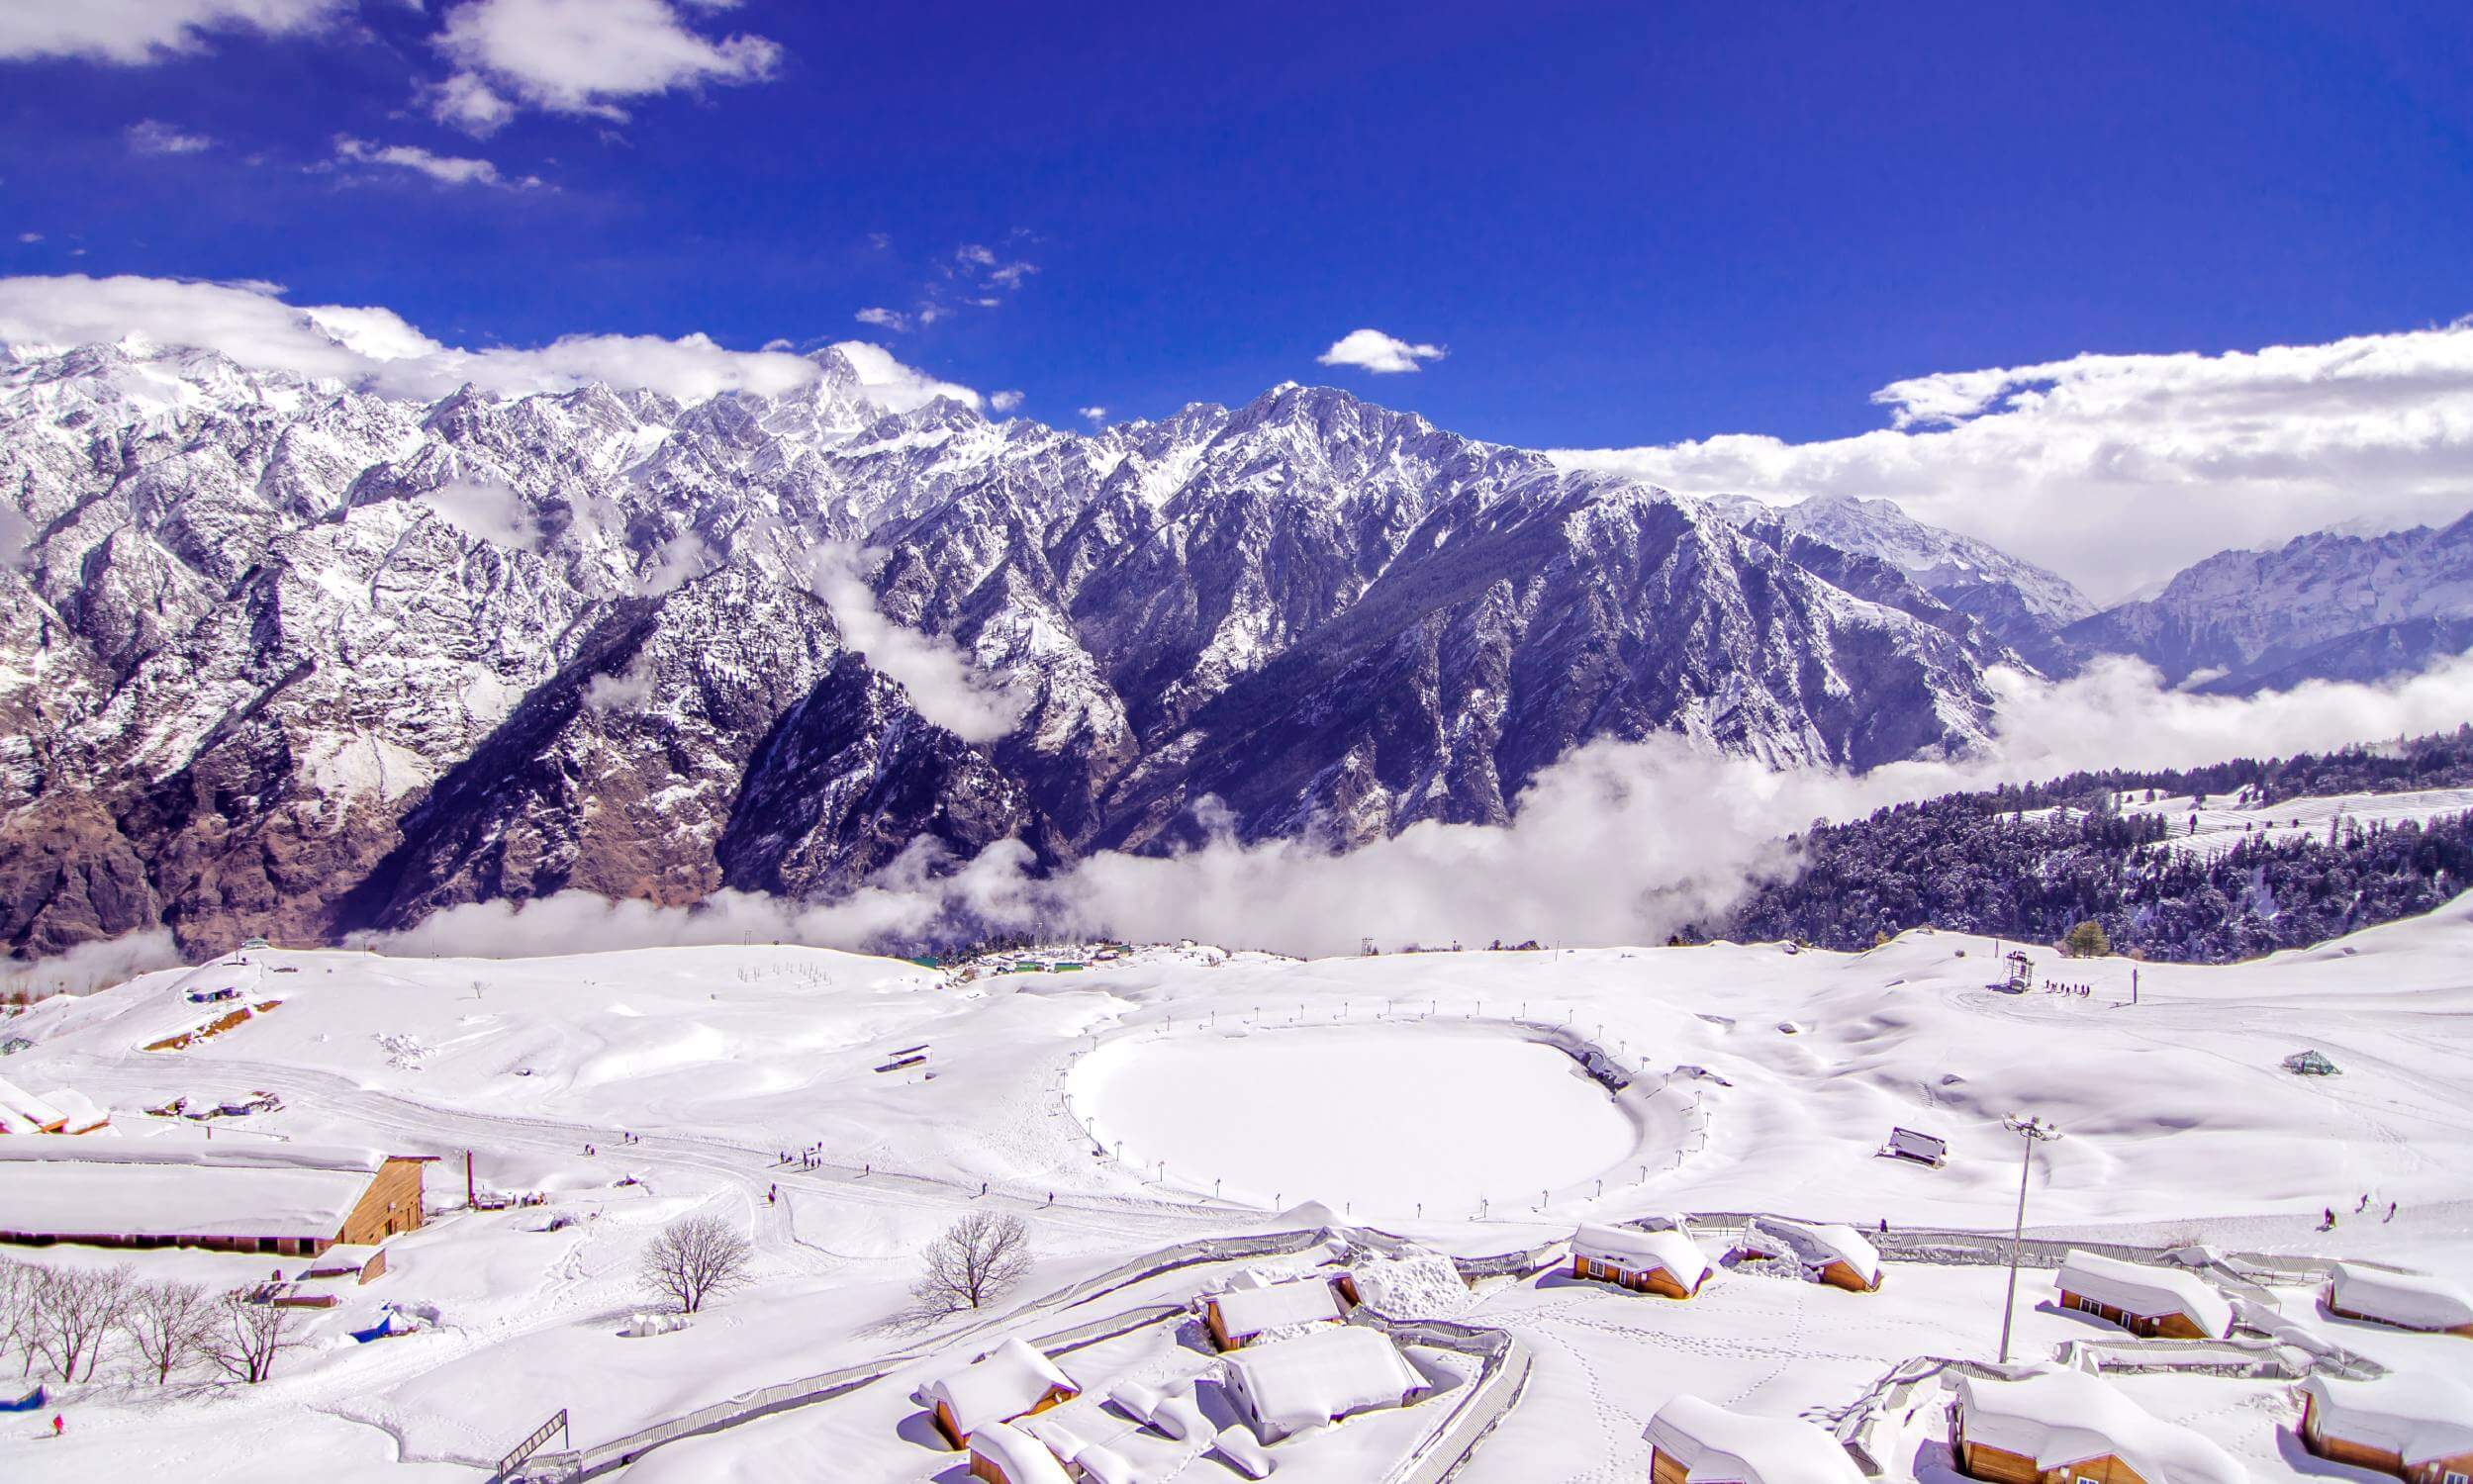 Auli Tourism- Best Places to Visit & Things to Do in Auli